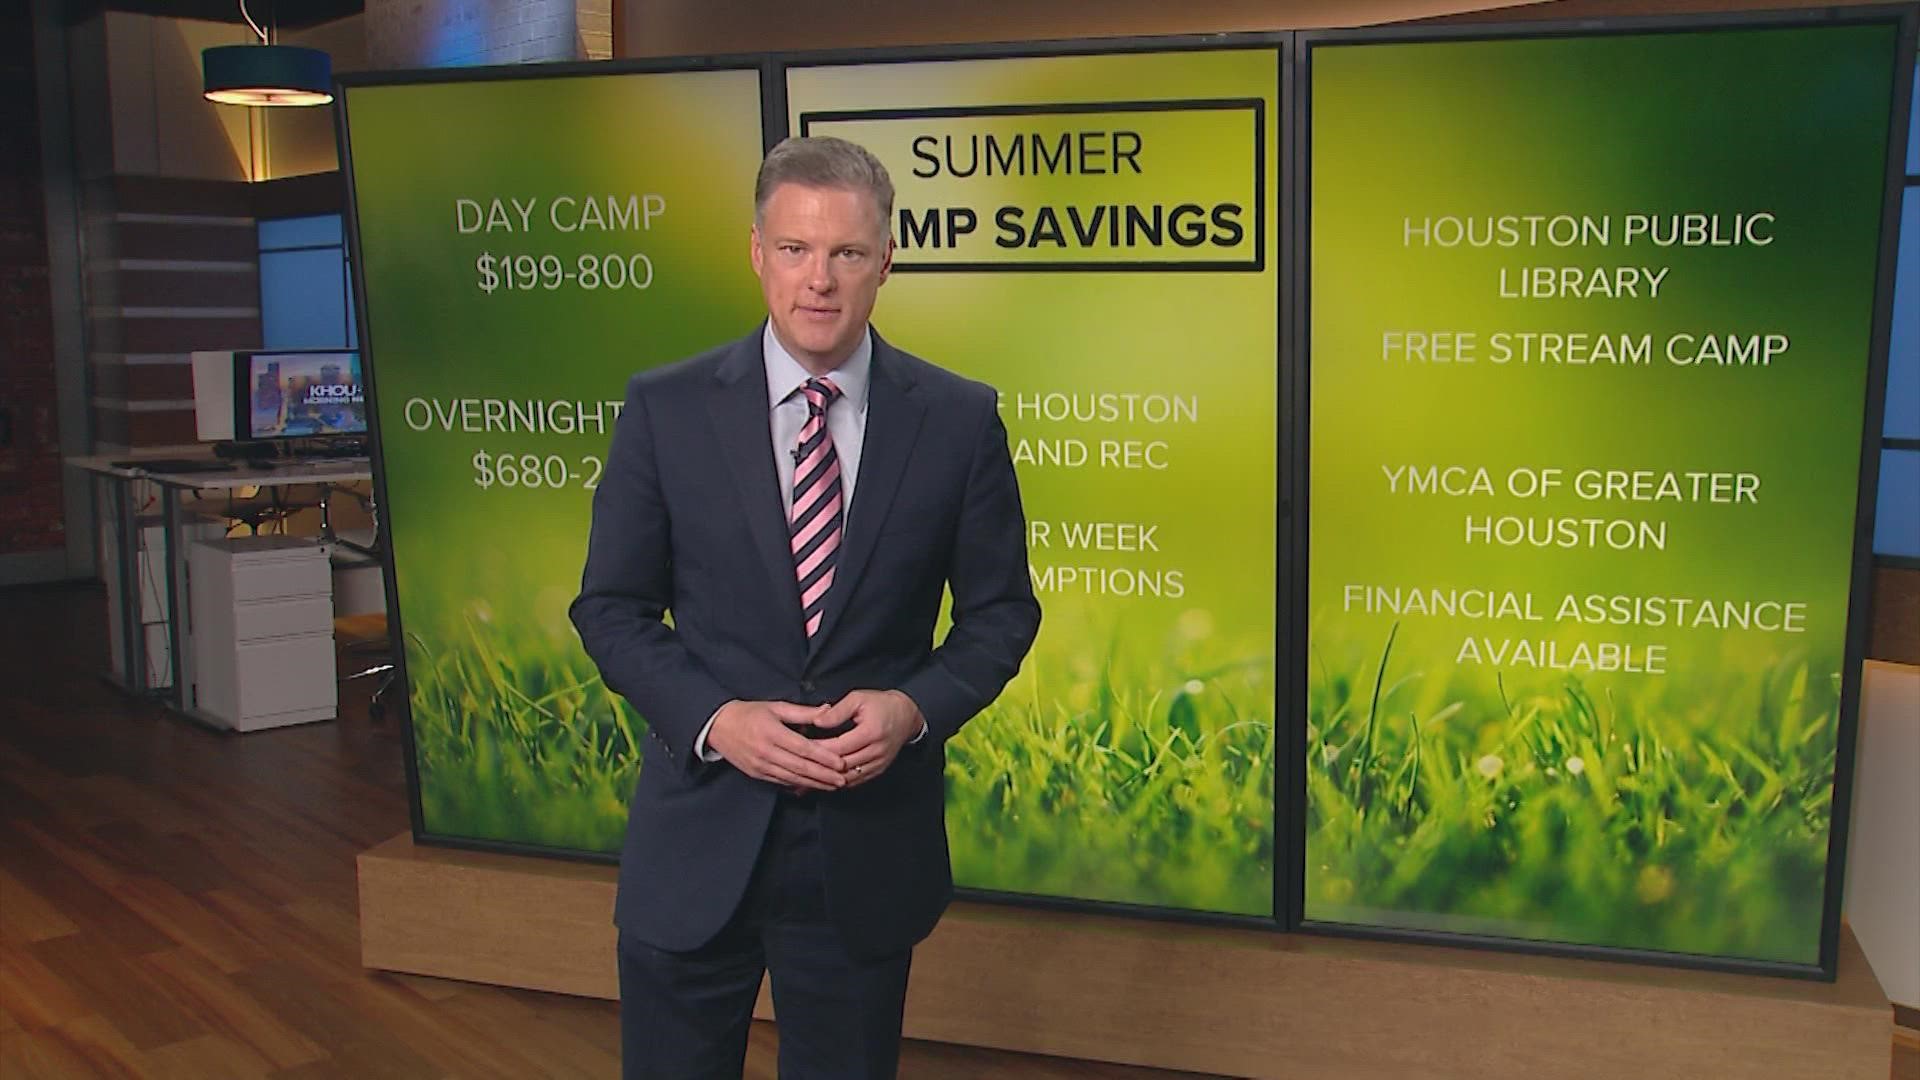 A look at the summer camp options that won't break the bank in Houston.